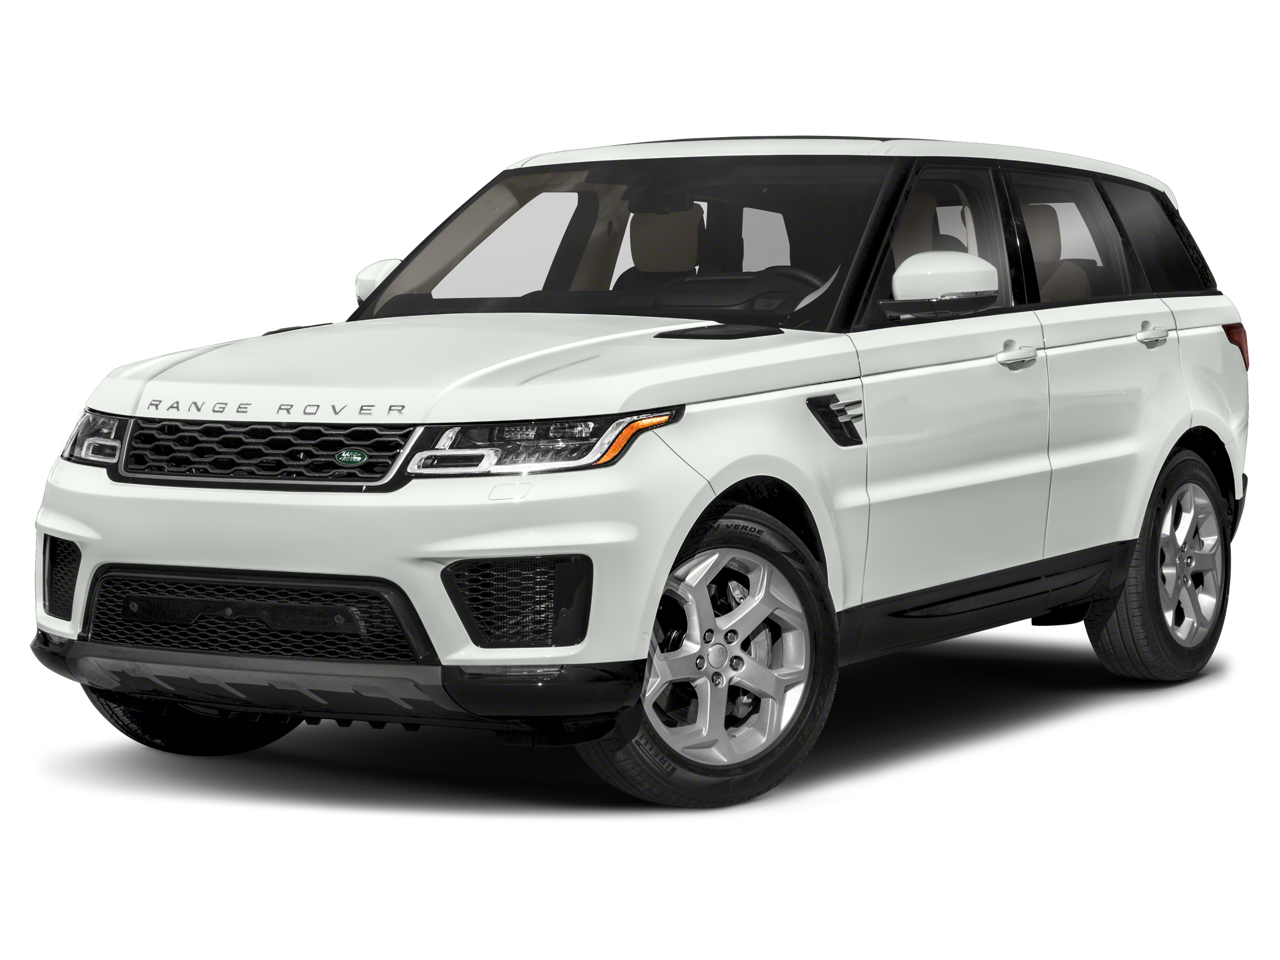 2019 Land Rover Range Rover Sport 5.0L V8 Supercharged Autobiography